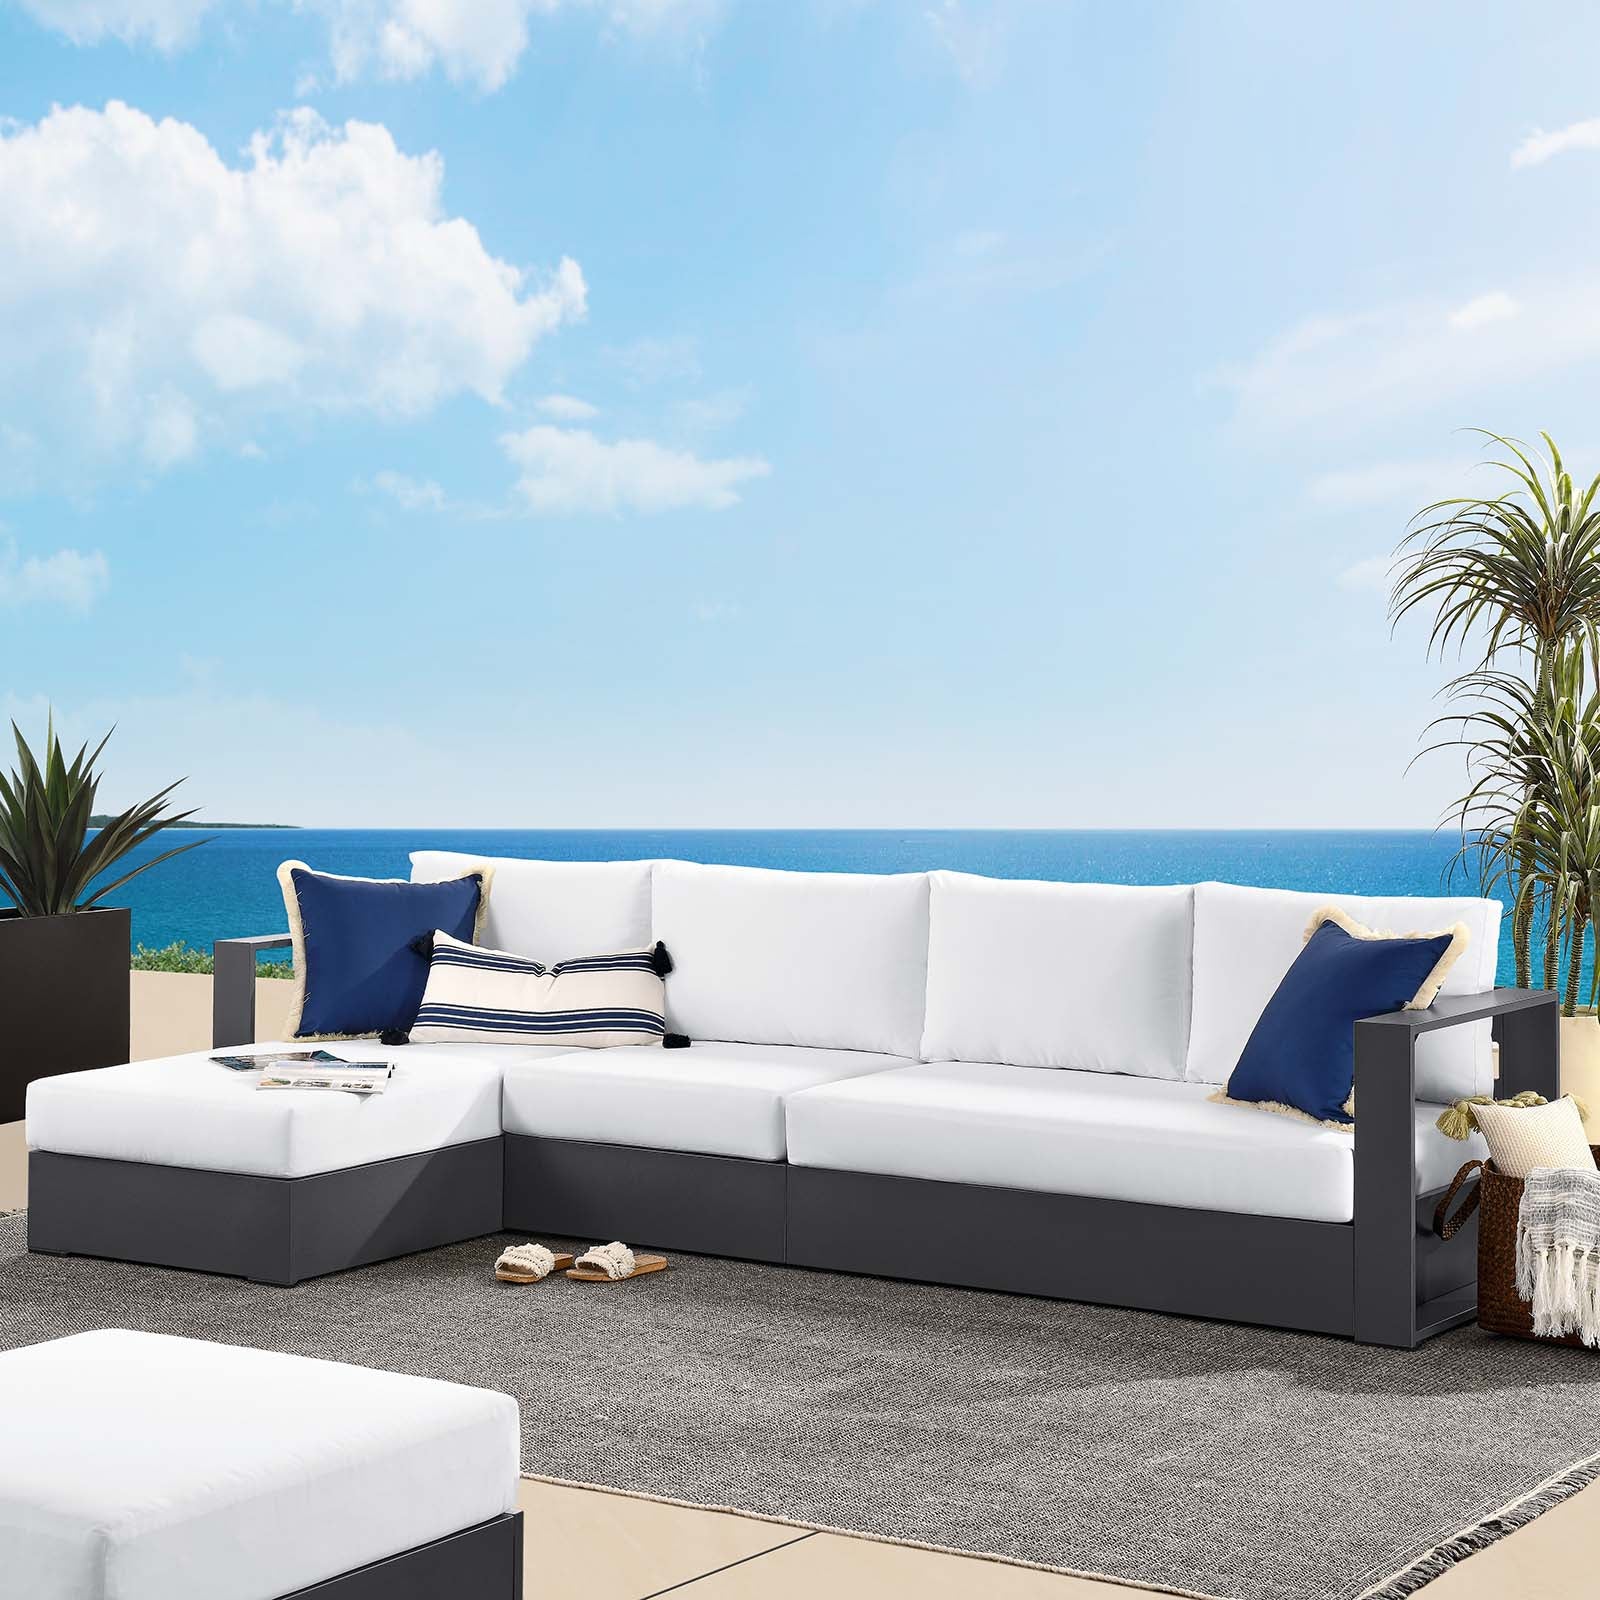 Tahoe Outdoor Patio Powder-Coated Aluminum 3-Piece Left-Facing Chaise Sectional Sofa Set